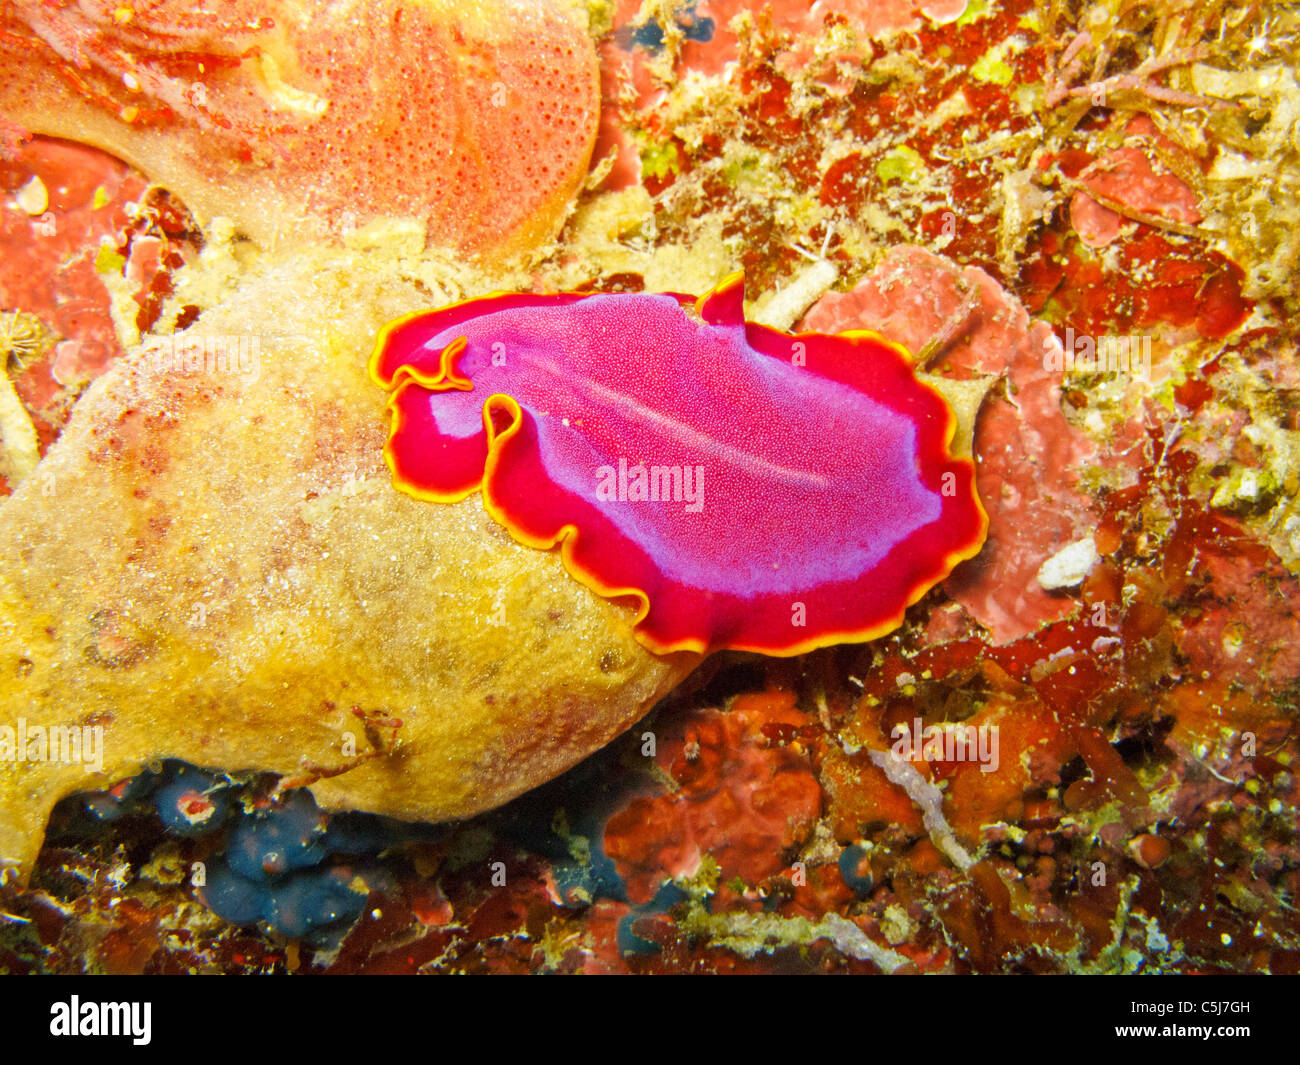 Colourful flat worm. Stock Photo